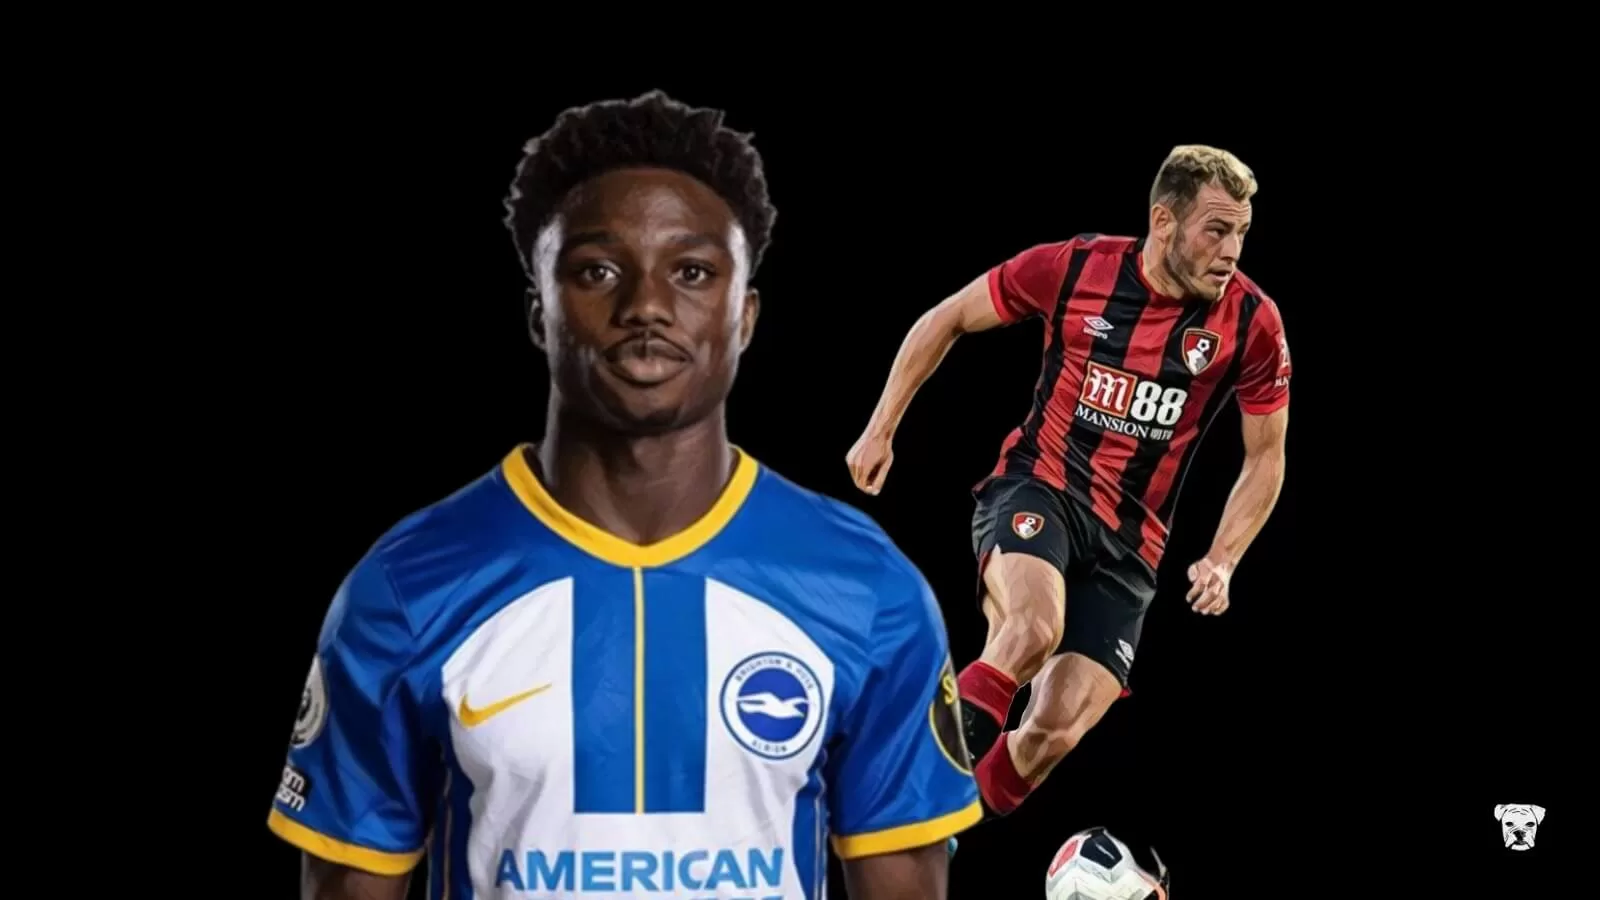 Tariq Lamptey, Ryan Fraser, and the shortest Premier League players ever – now and in league history.